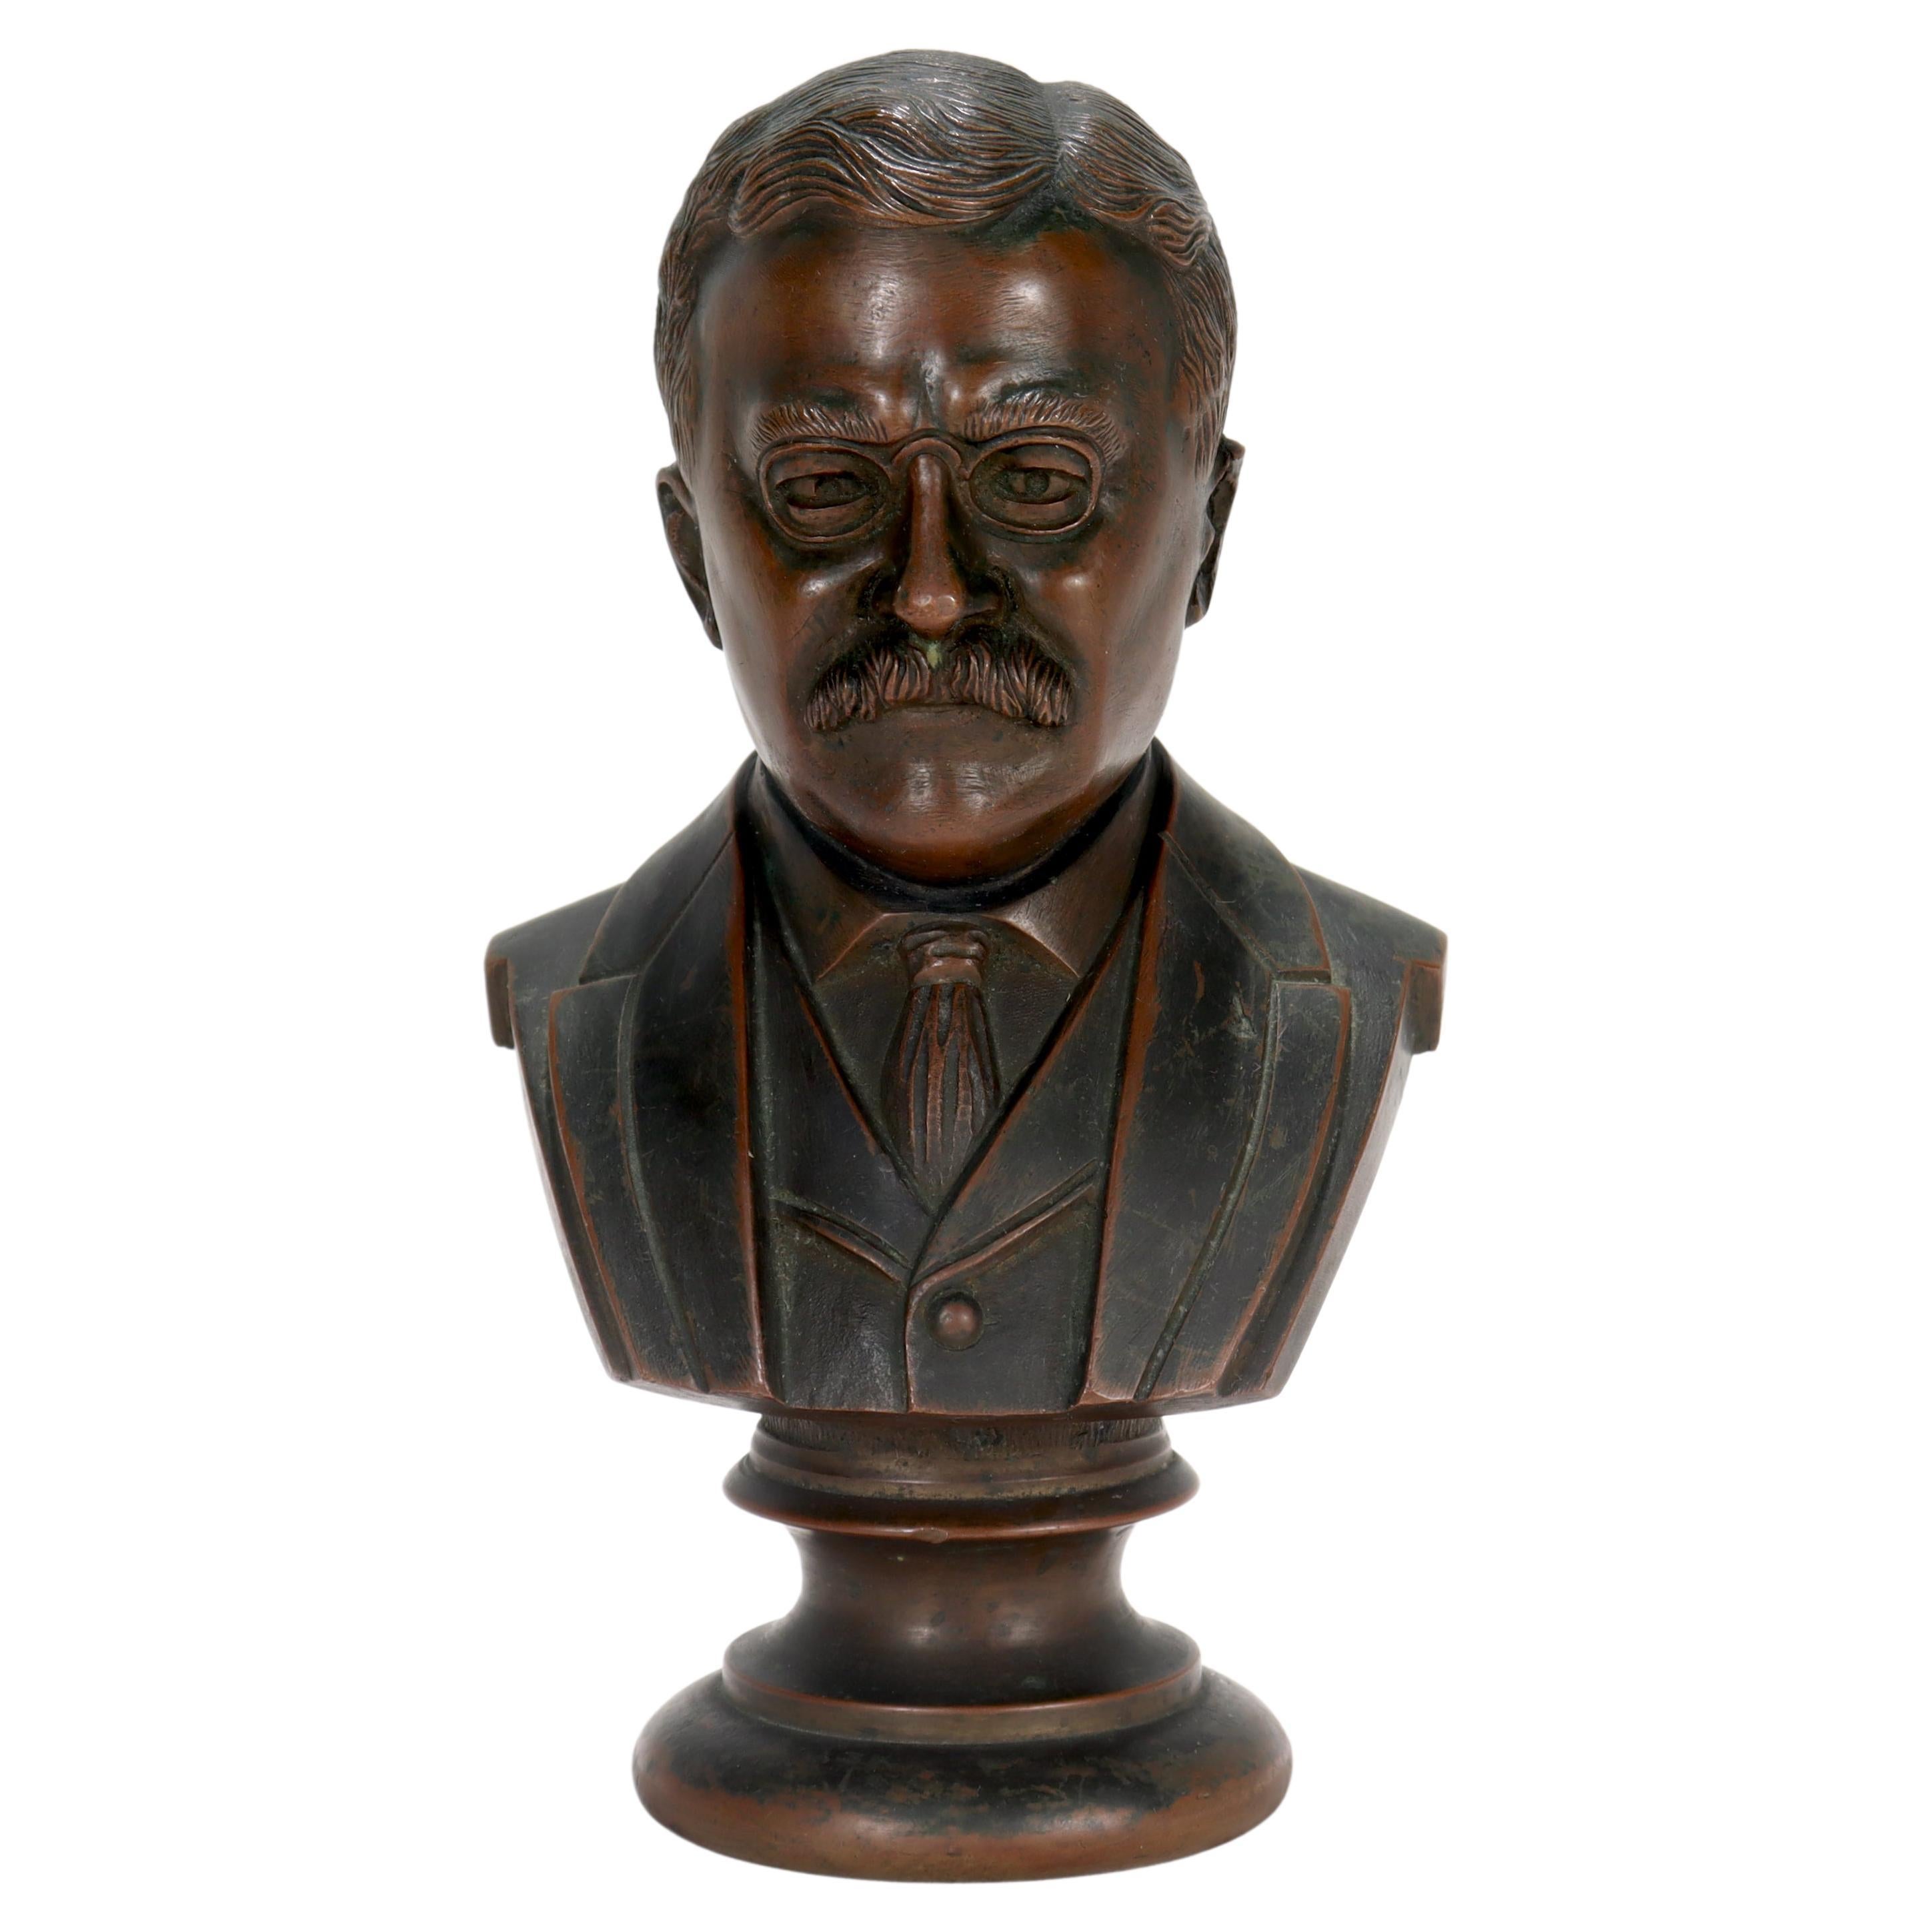 Small Desk or Cabinet Sized Bronze Bust of President Theodore 'Teddy' Roosevelt